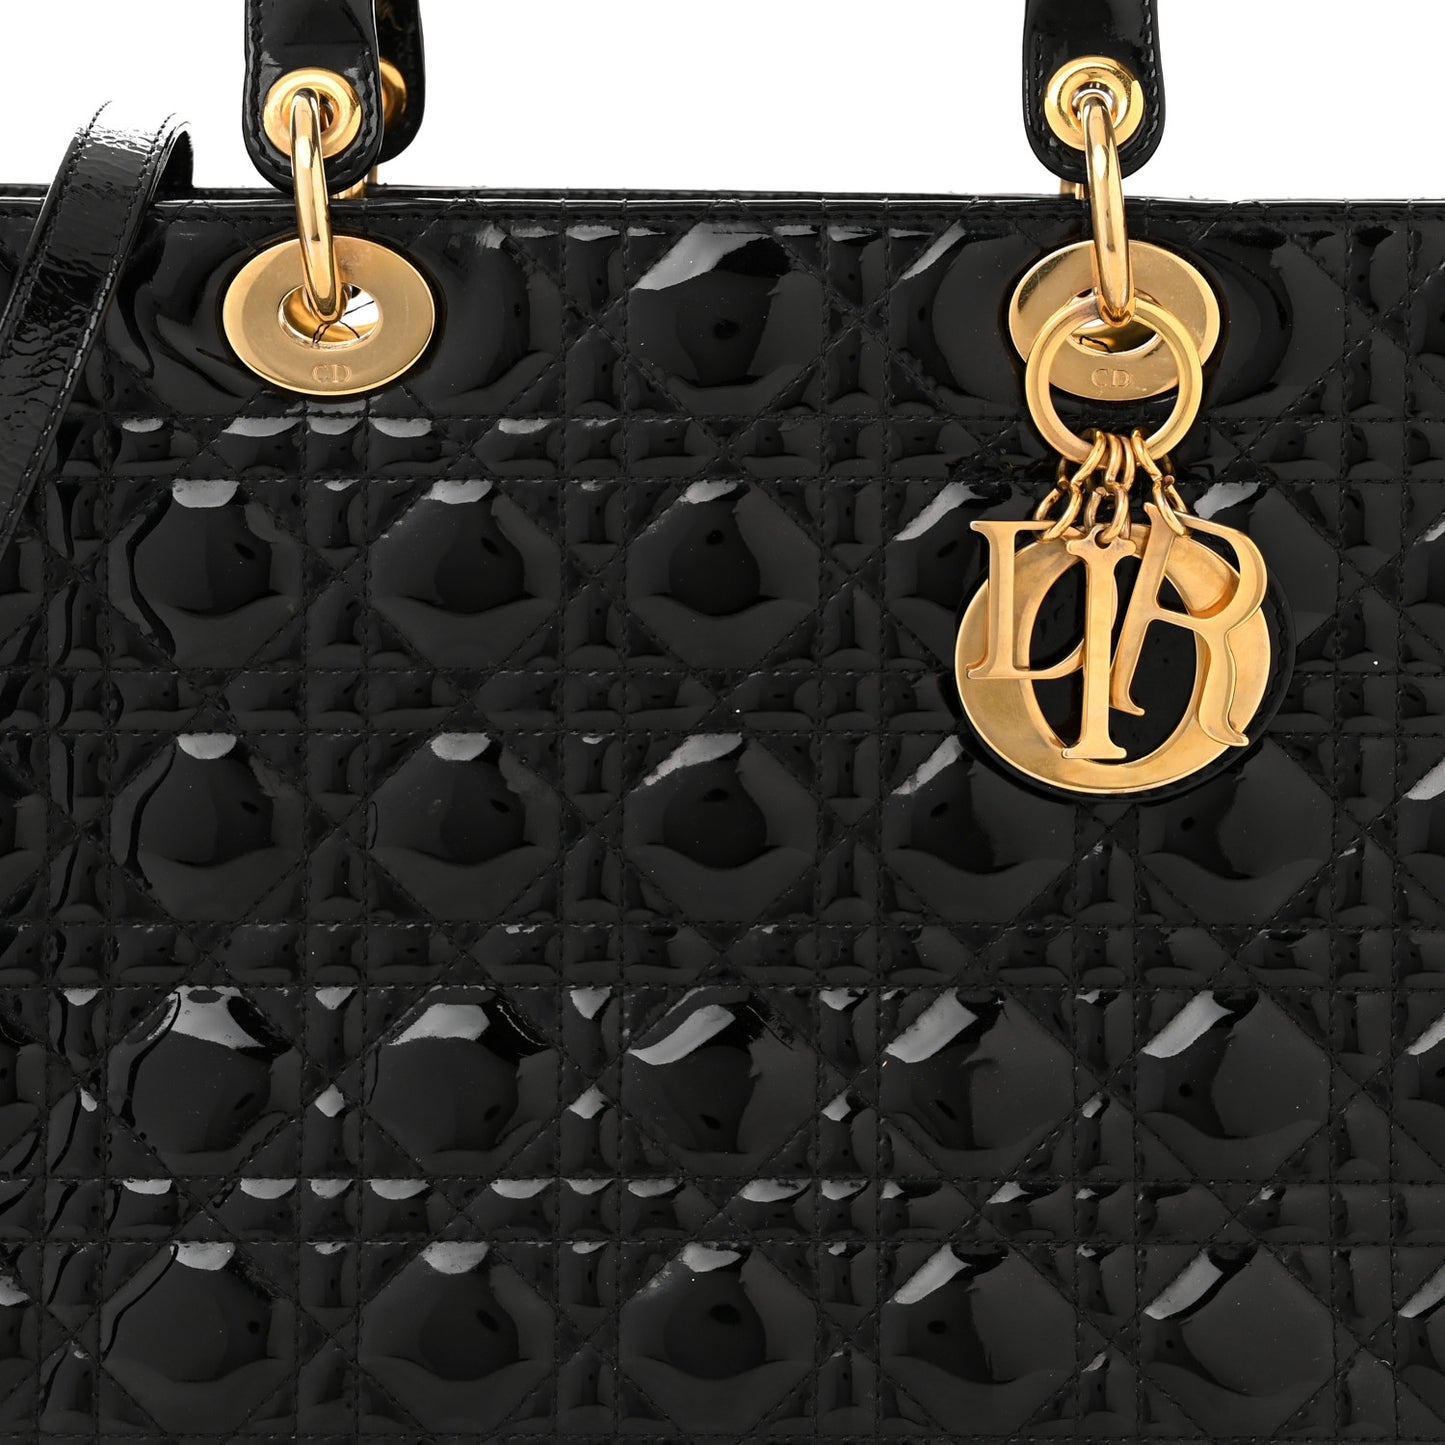 Patent Cannage Large Lady Dior Black